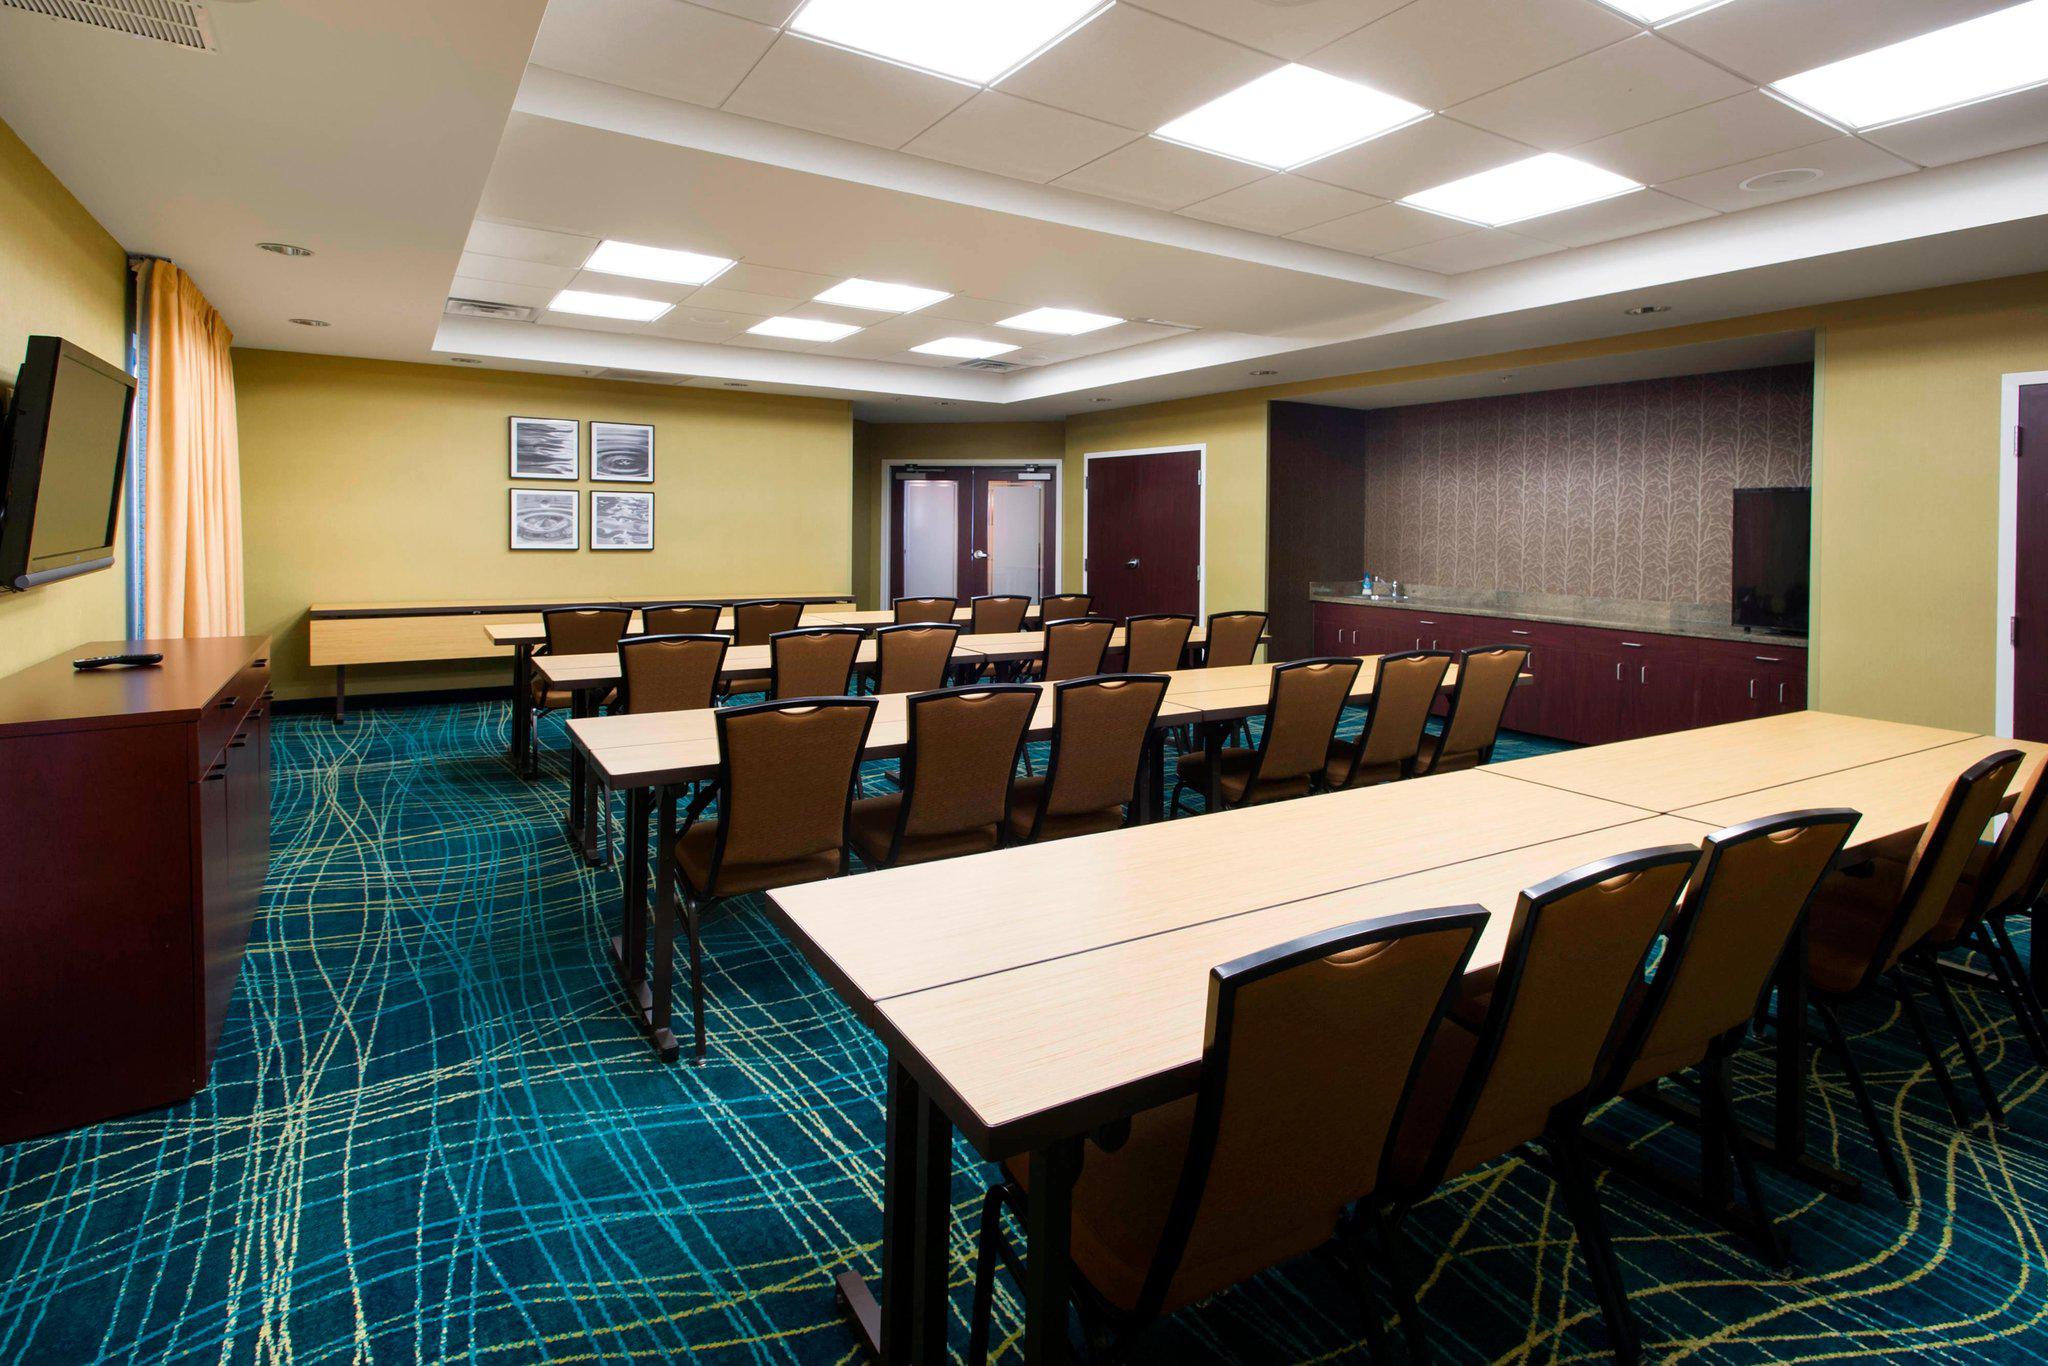 SpringHill Suites by Marriott Omaha East/Council Bluffs, IA Photo